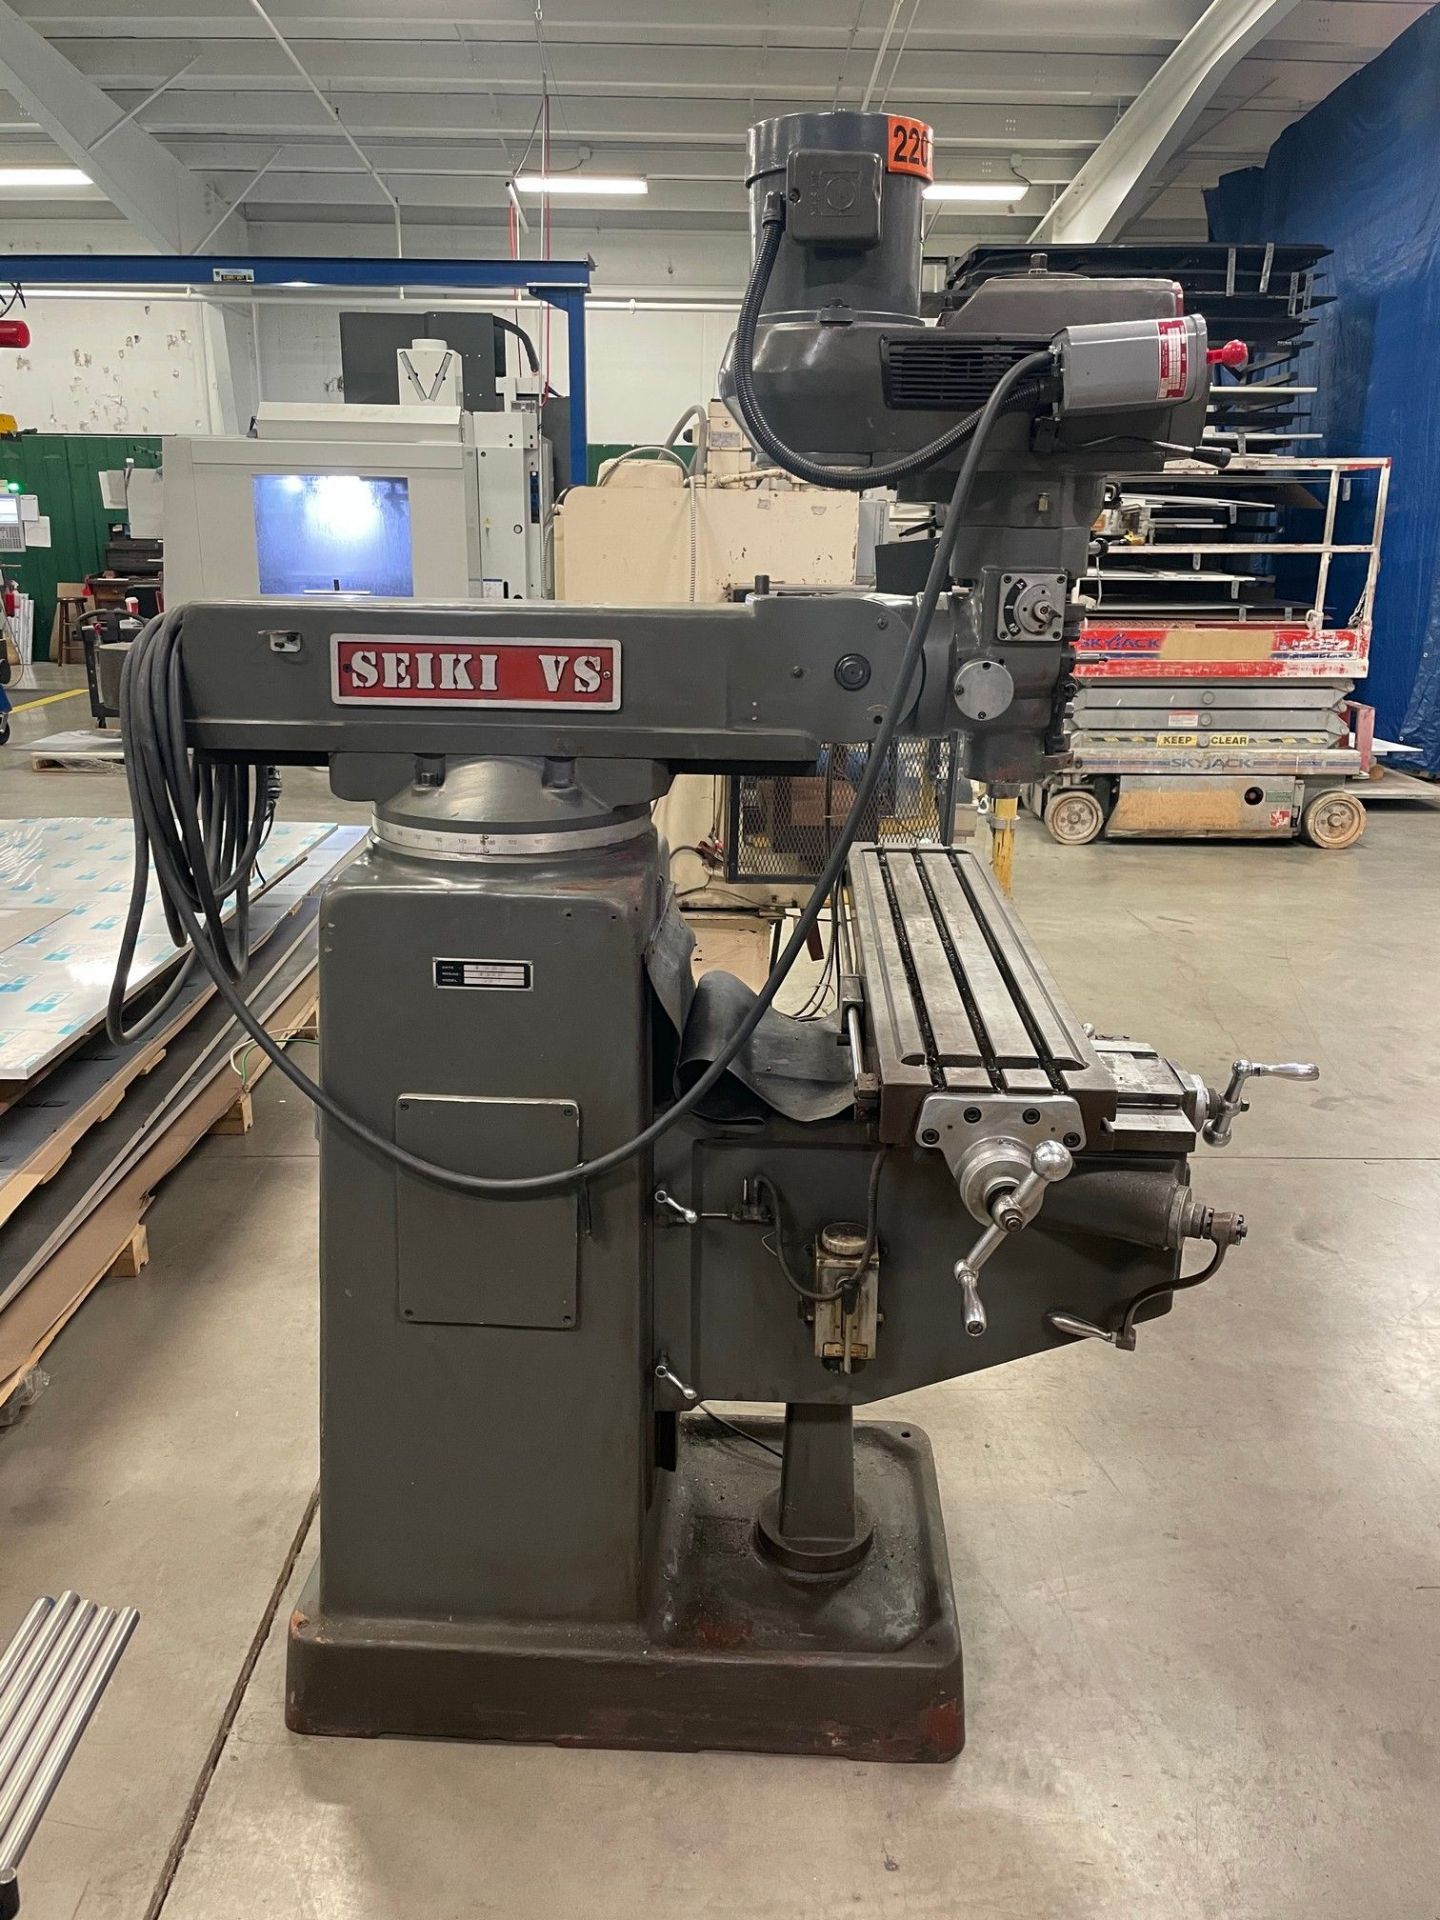 3 HP SEIKI MODEL 3VH VERTICAL MILLING MACHINE; S/N 8328, 10" X 50" TABLE, NEWALL DRO - Image 4 of 7